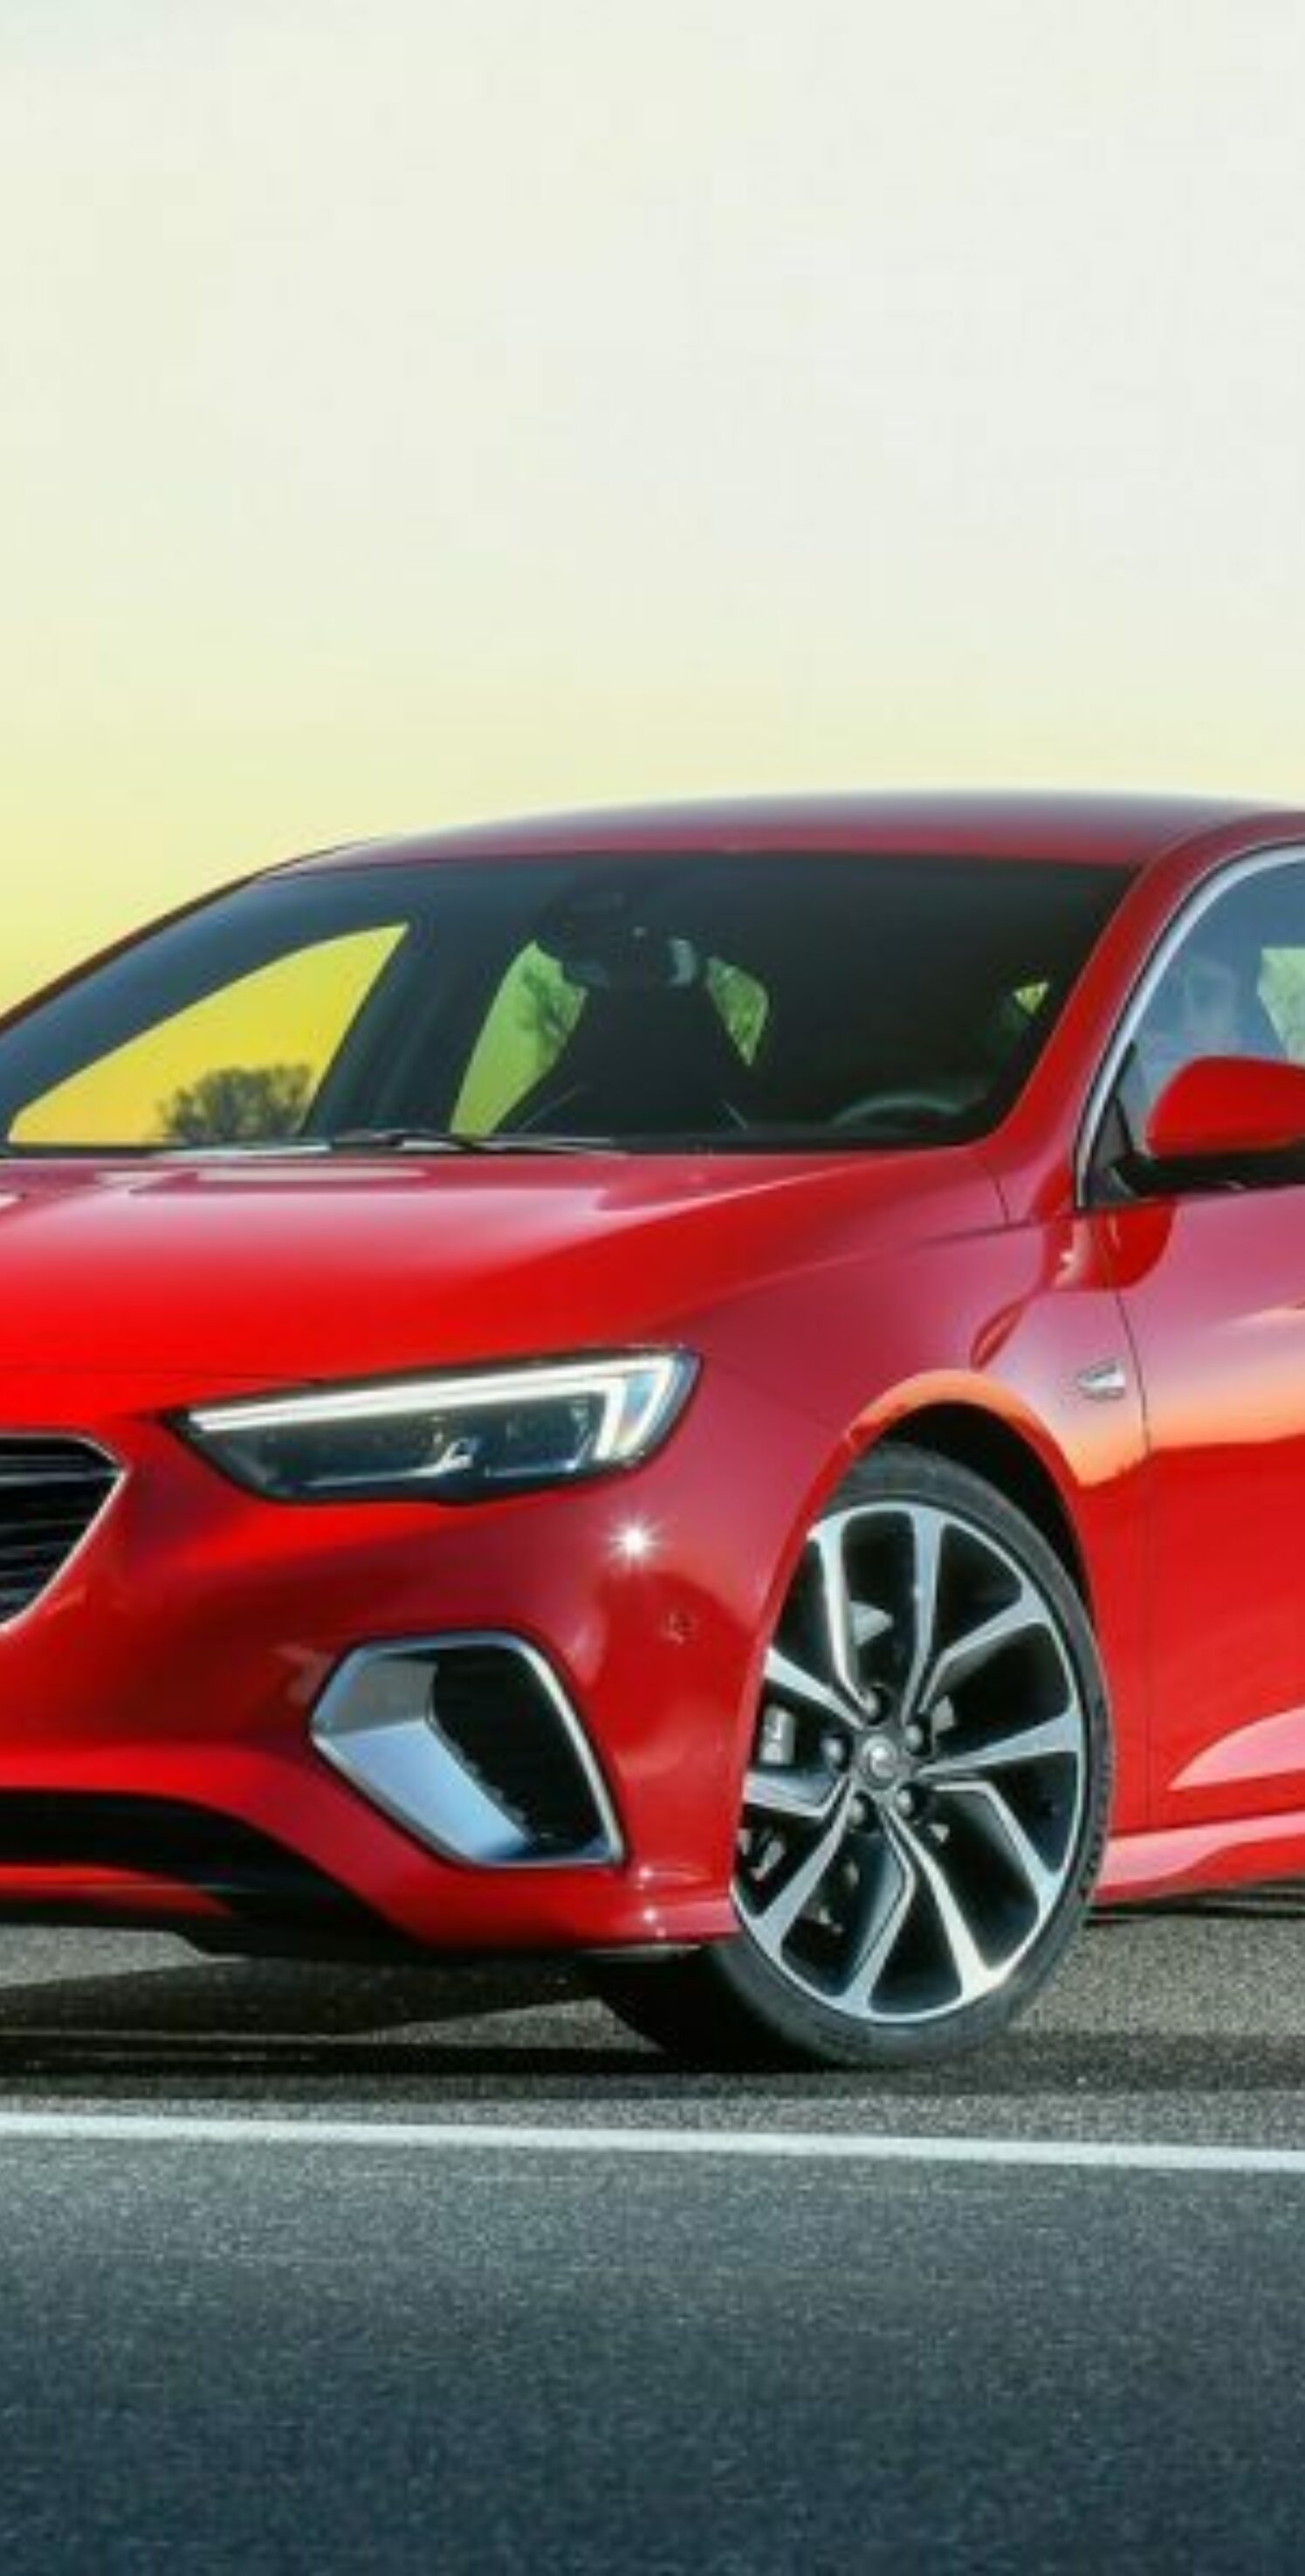 https://autofilter.sk/assets/images/insignia-grand-sport/gallery/Opel-Insignia-GSi-polygon-013.jpeg - obrazok